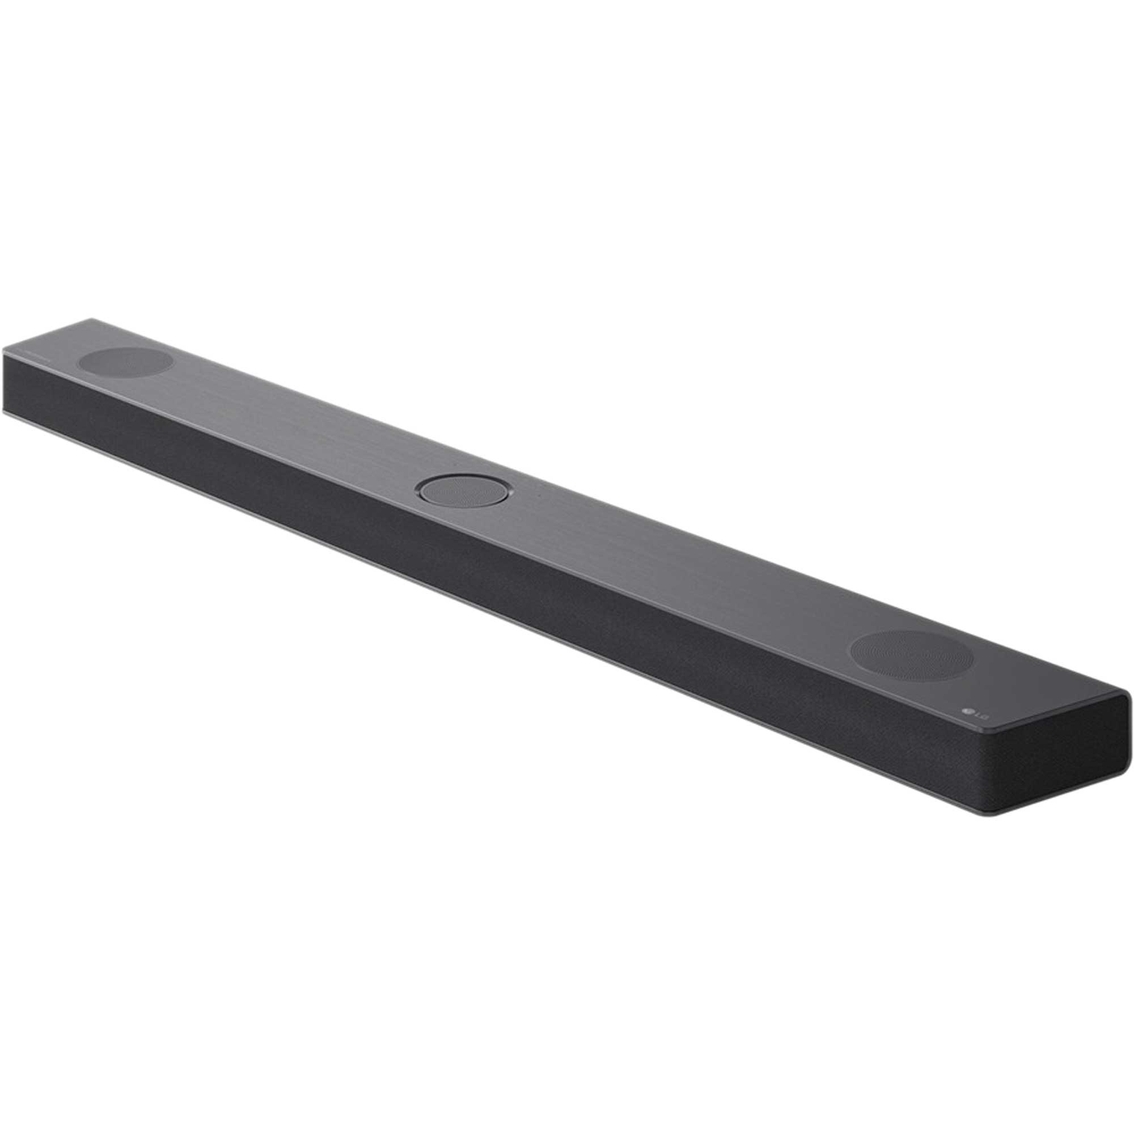 LG S95QR 9.1.5 Ch. 810W High Res Audio Sound Bar and Rear Surround Speakers - Image 5 of 10